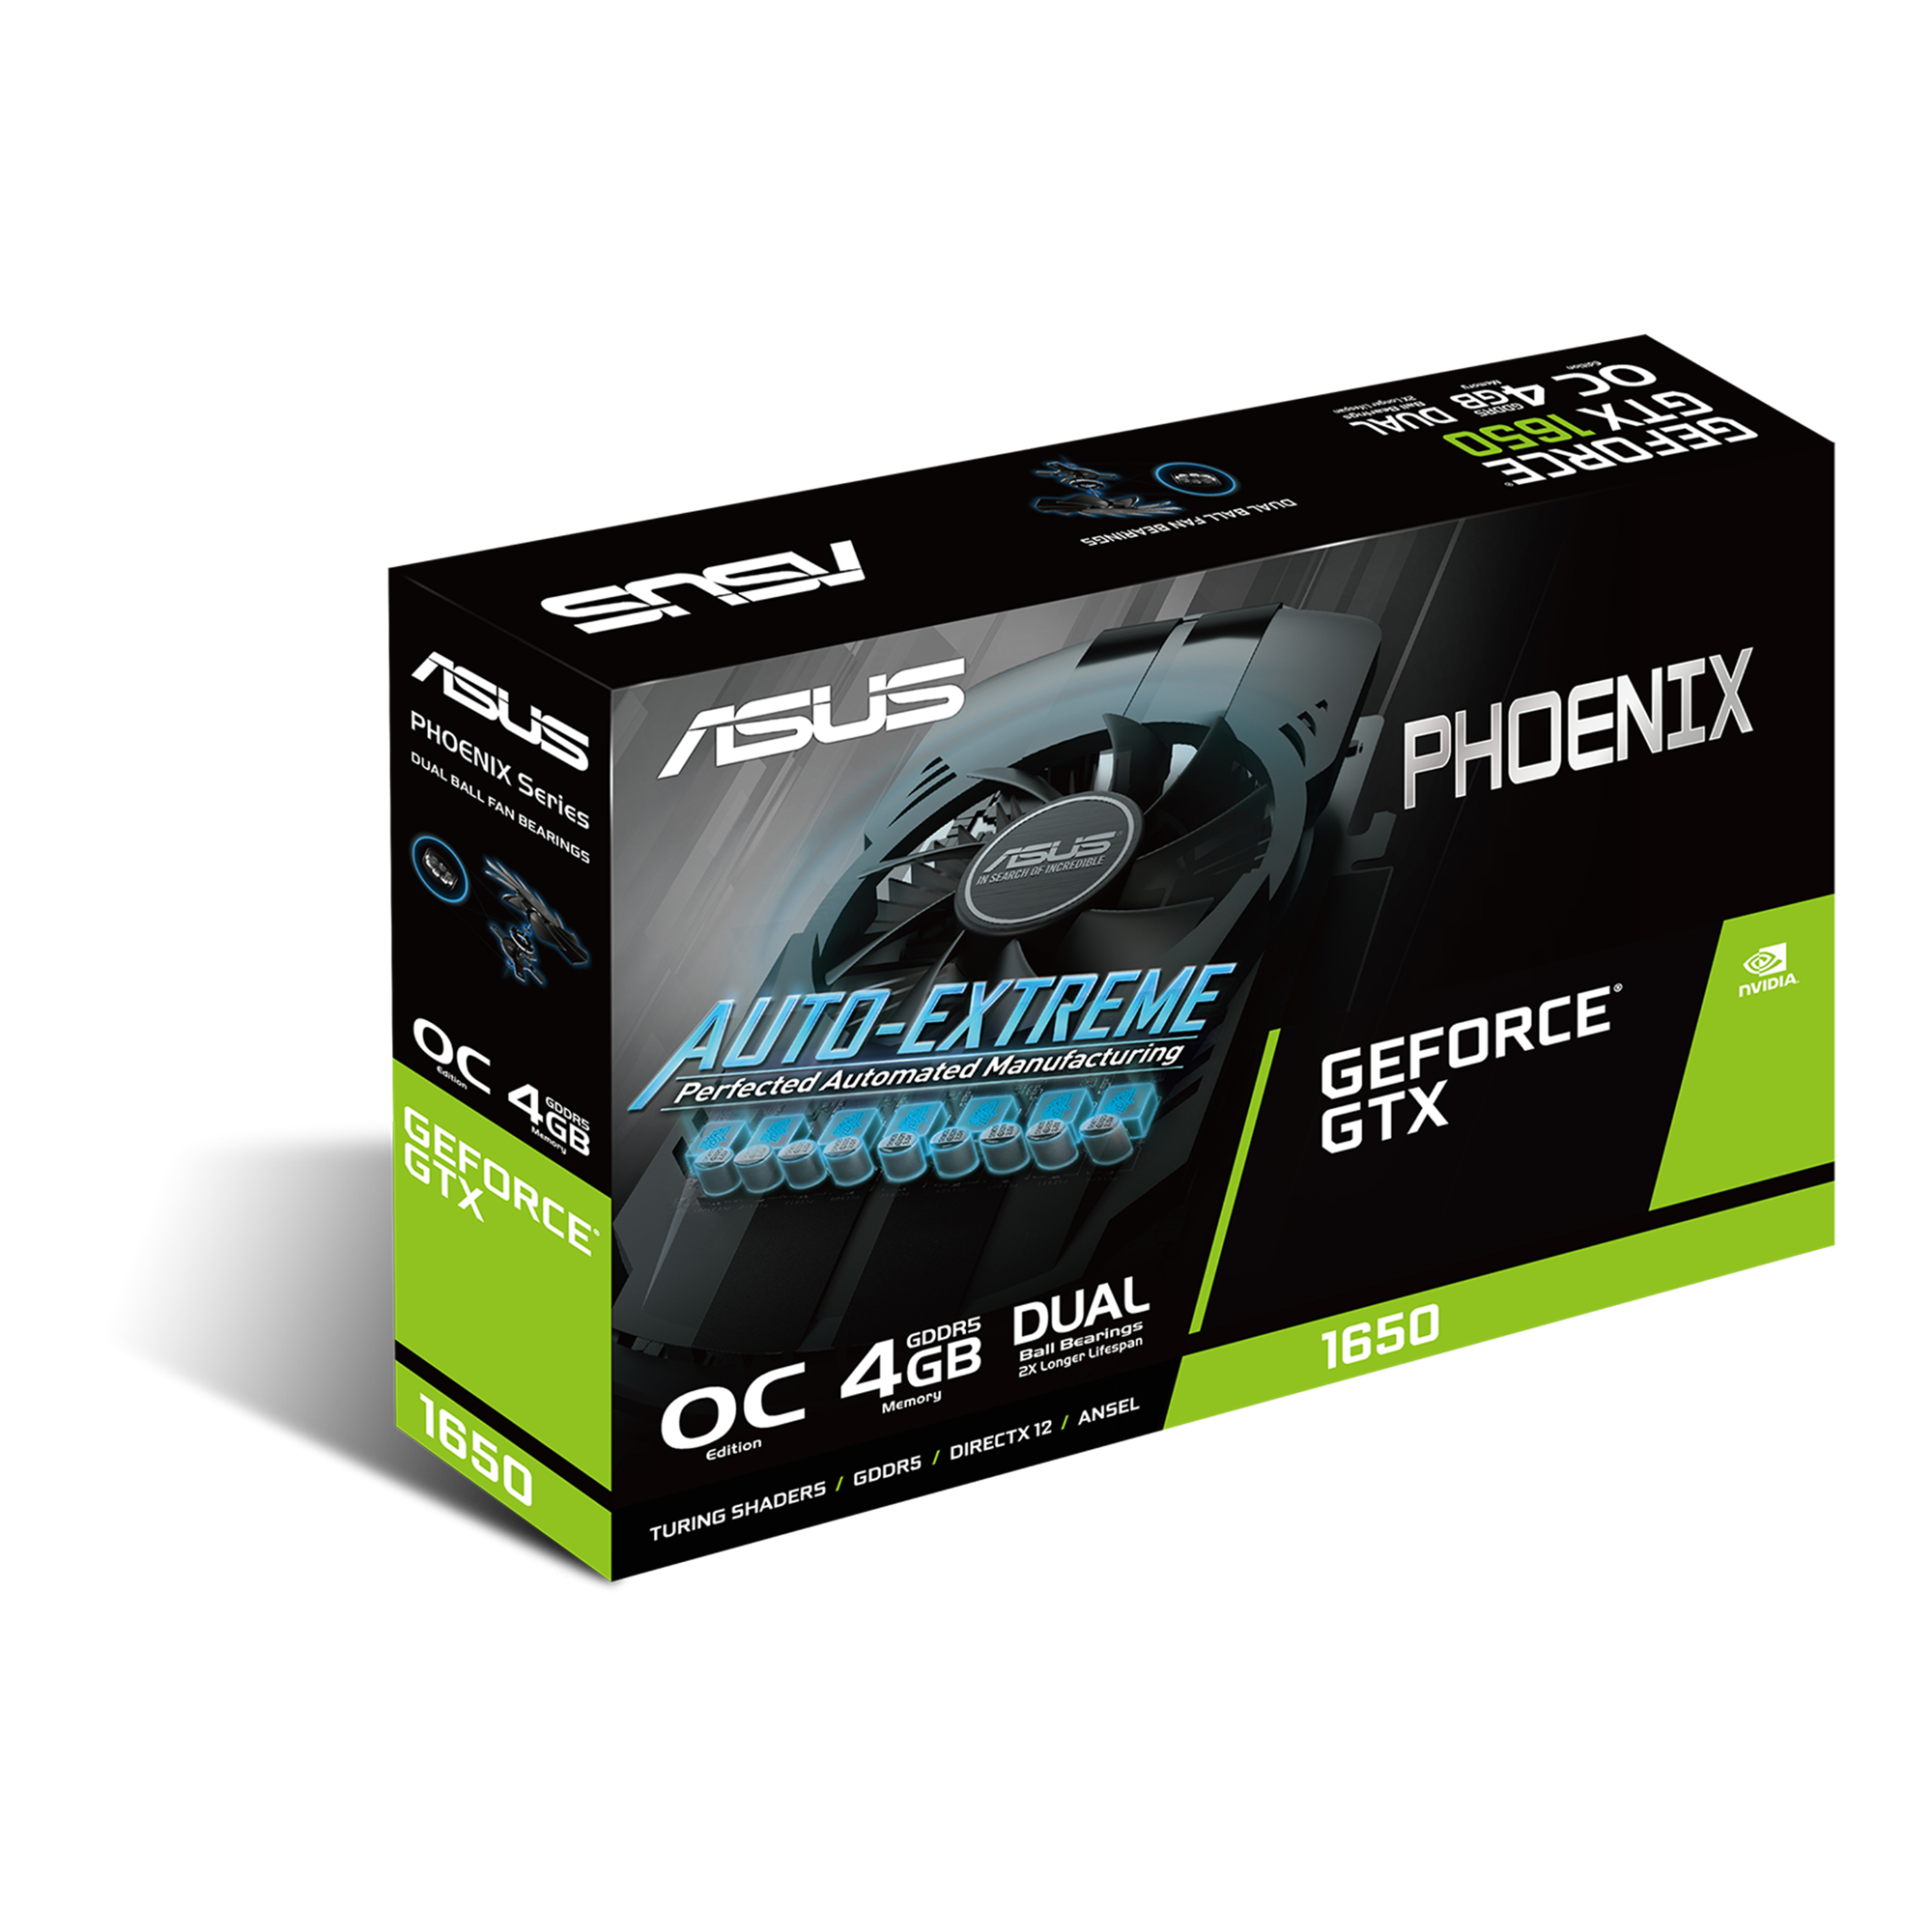 PH-GTX1650-O4G｜Graphics Cards｜ASUS Philippines